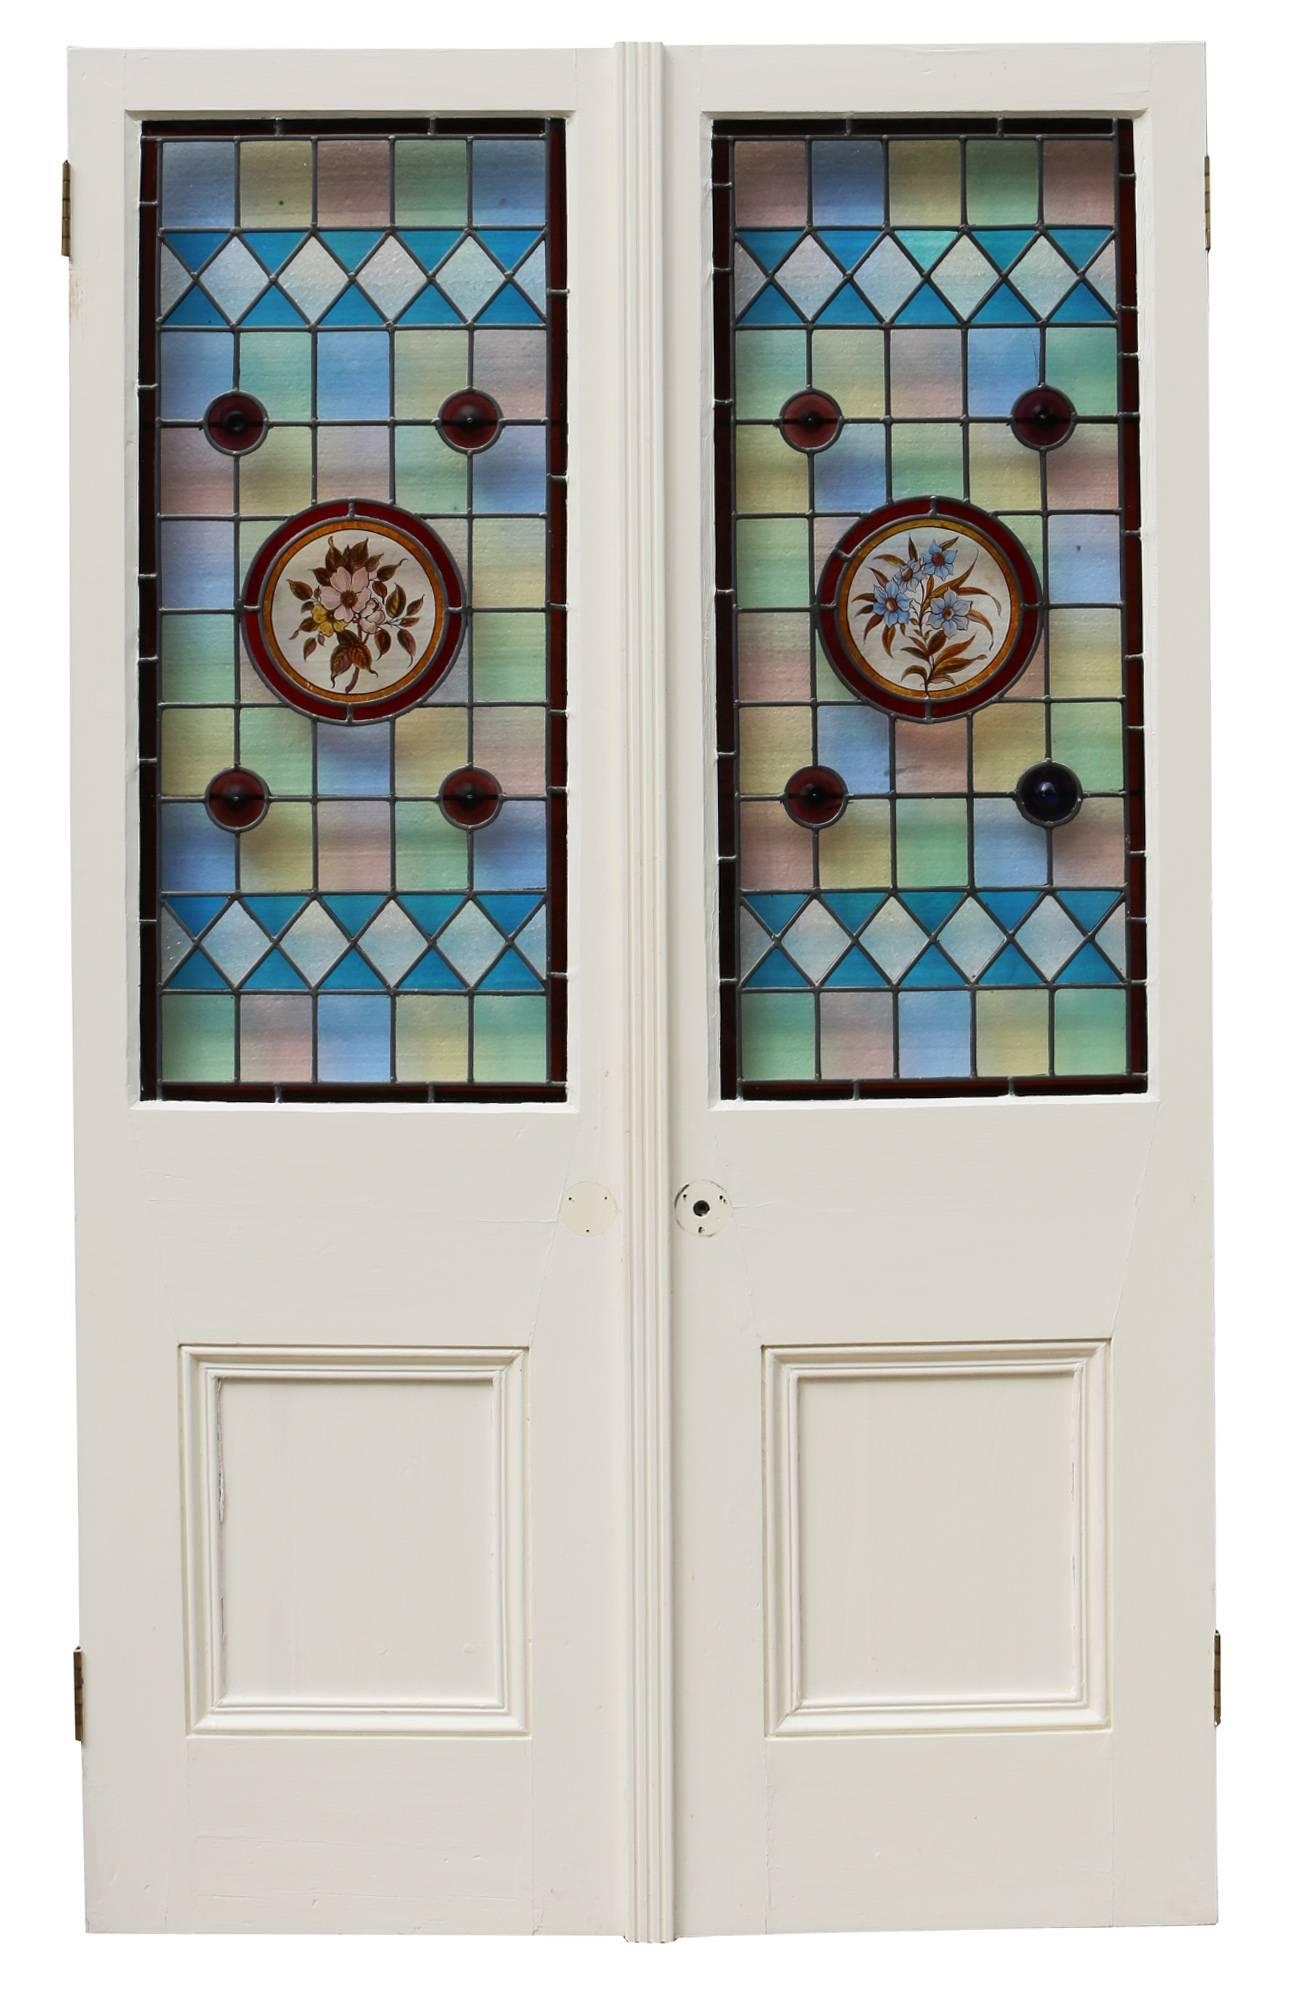 These doors have been hand-painted and have glass roundels.
Weight 25 kg
Please note glass is not insured in transit outside of the UK.